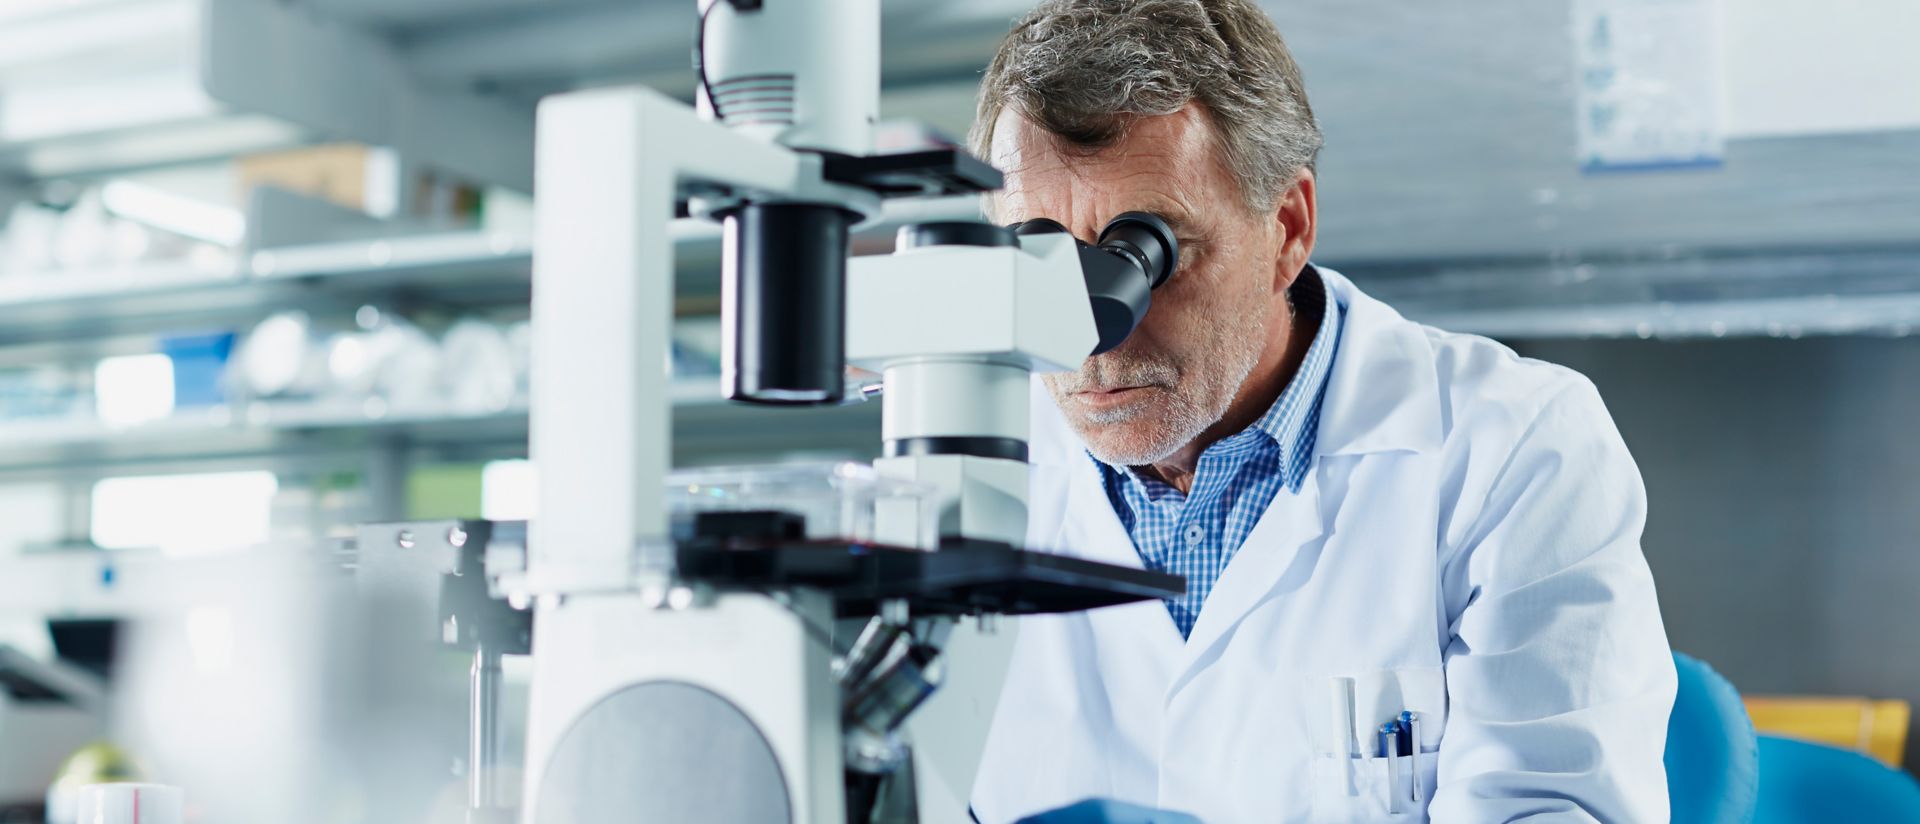 Scientist looking through microscope in research laboratory